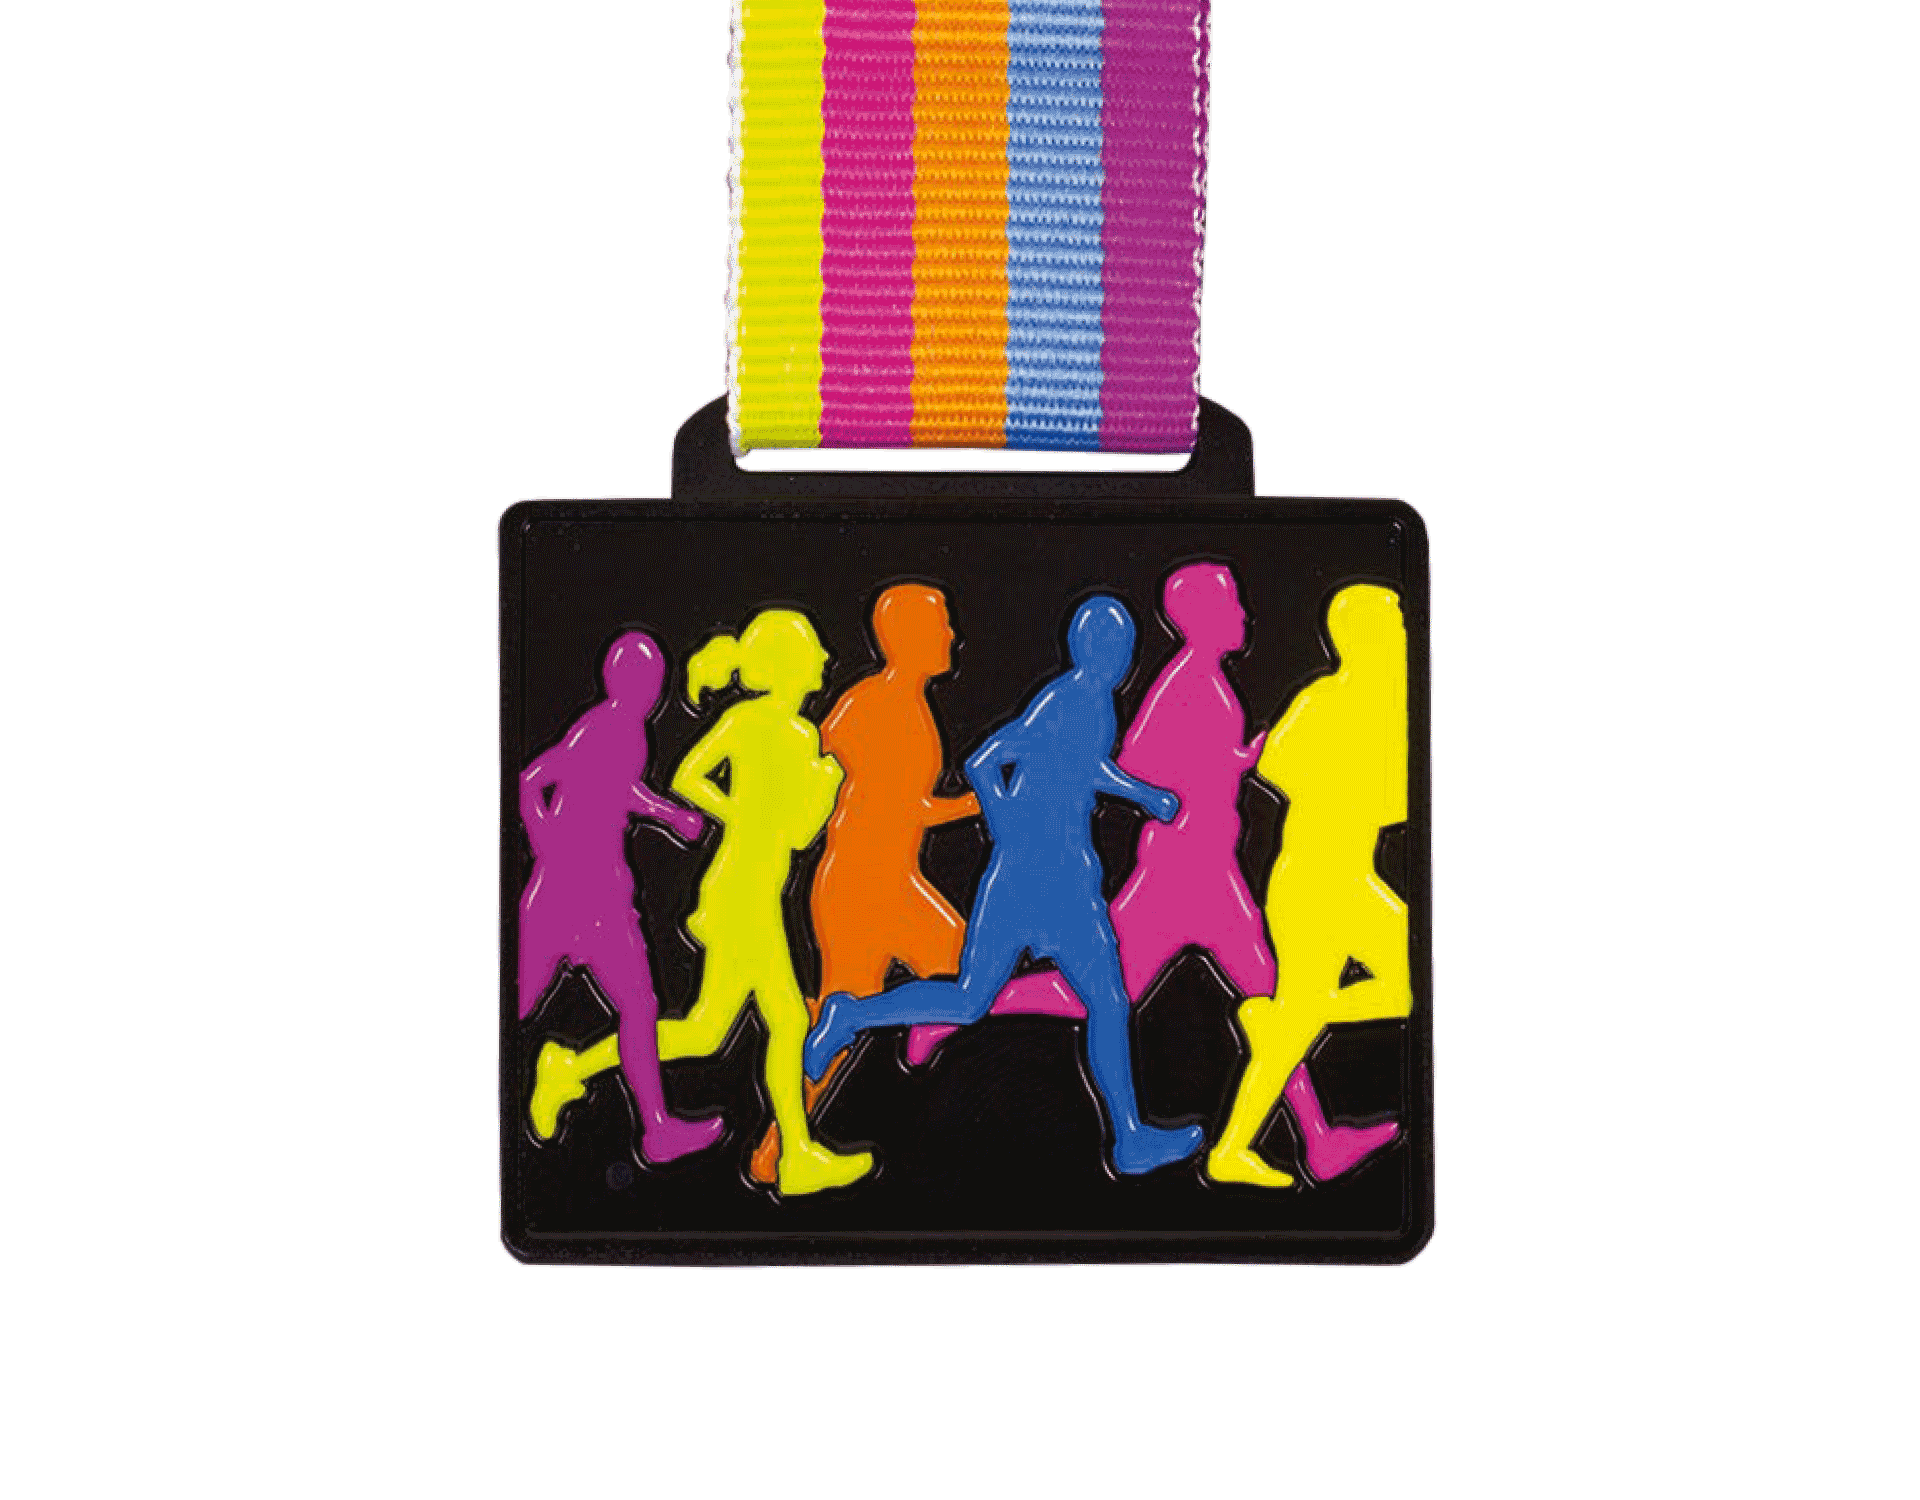 http://res.cloudinary.com/running-imp-ltd/image/upload/v1627635599/Product%20Images/Medals%2C%20Centres%20and%20Ribbons/Medals/Free%20Neon%20Ribbon%20Medals/Neon-1_cflyw5.png